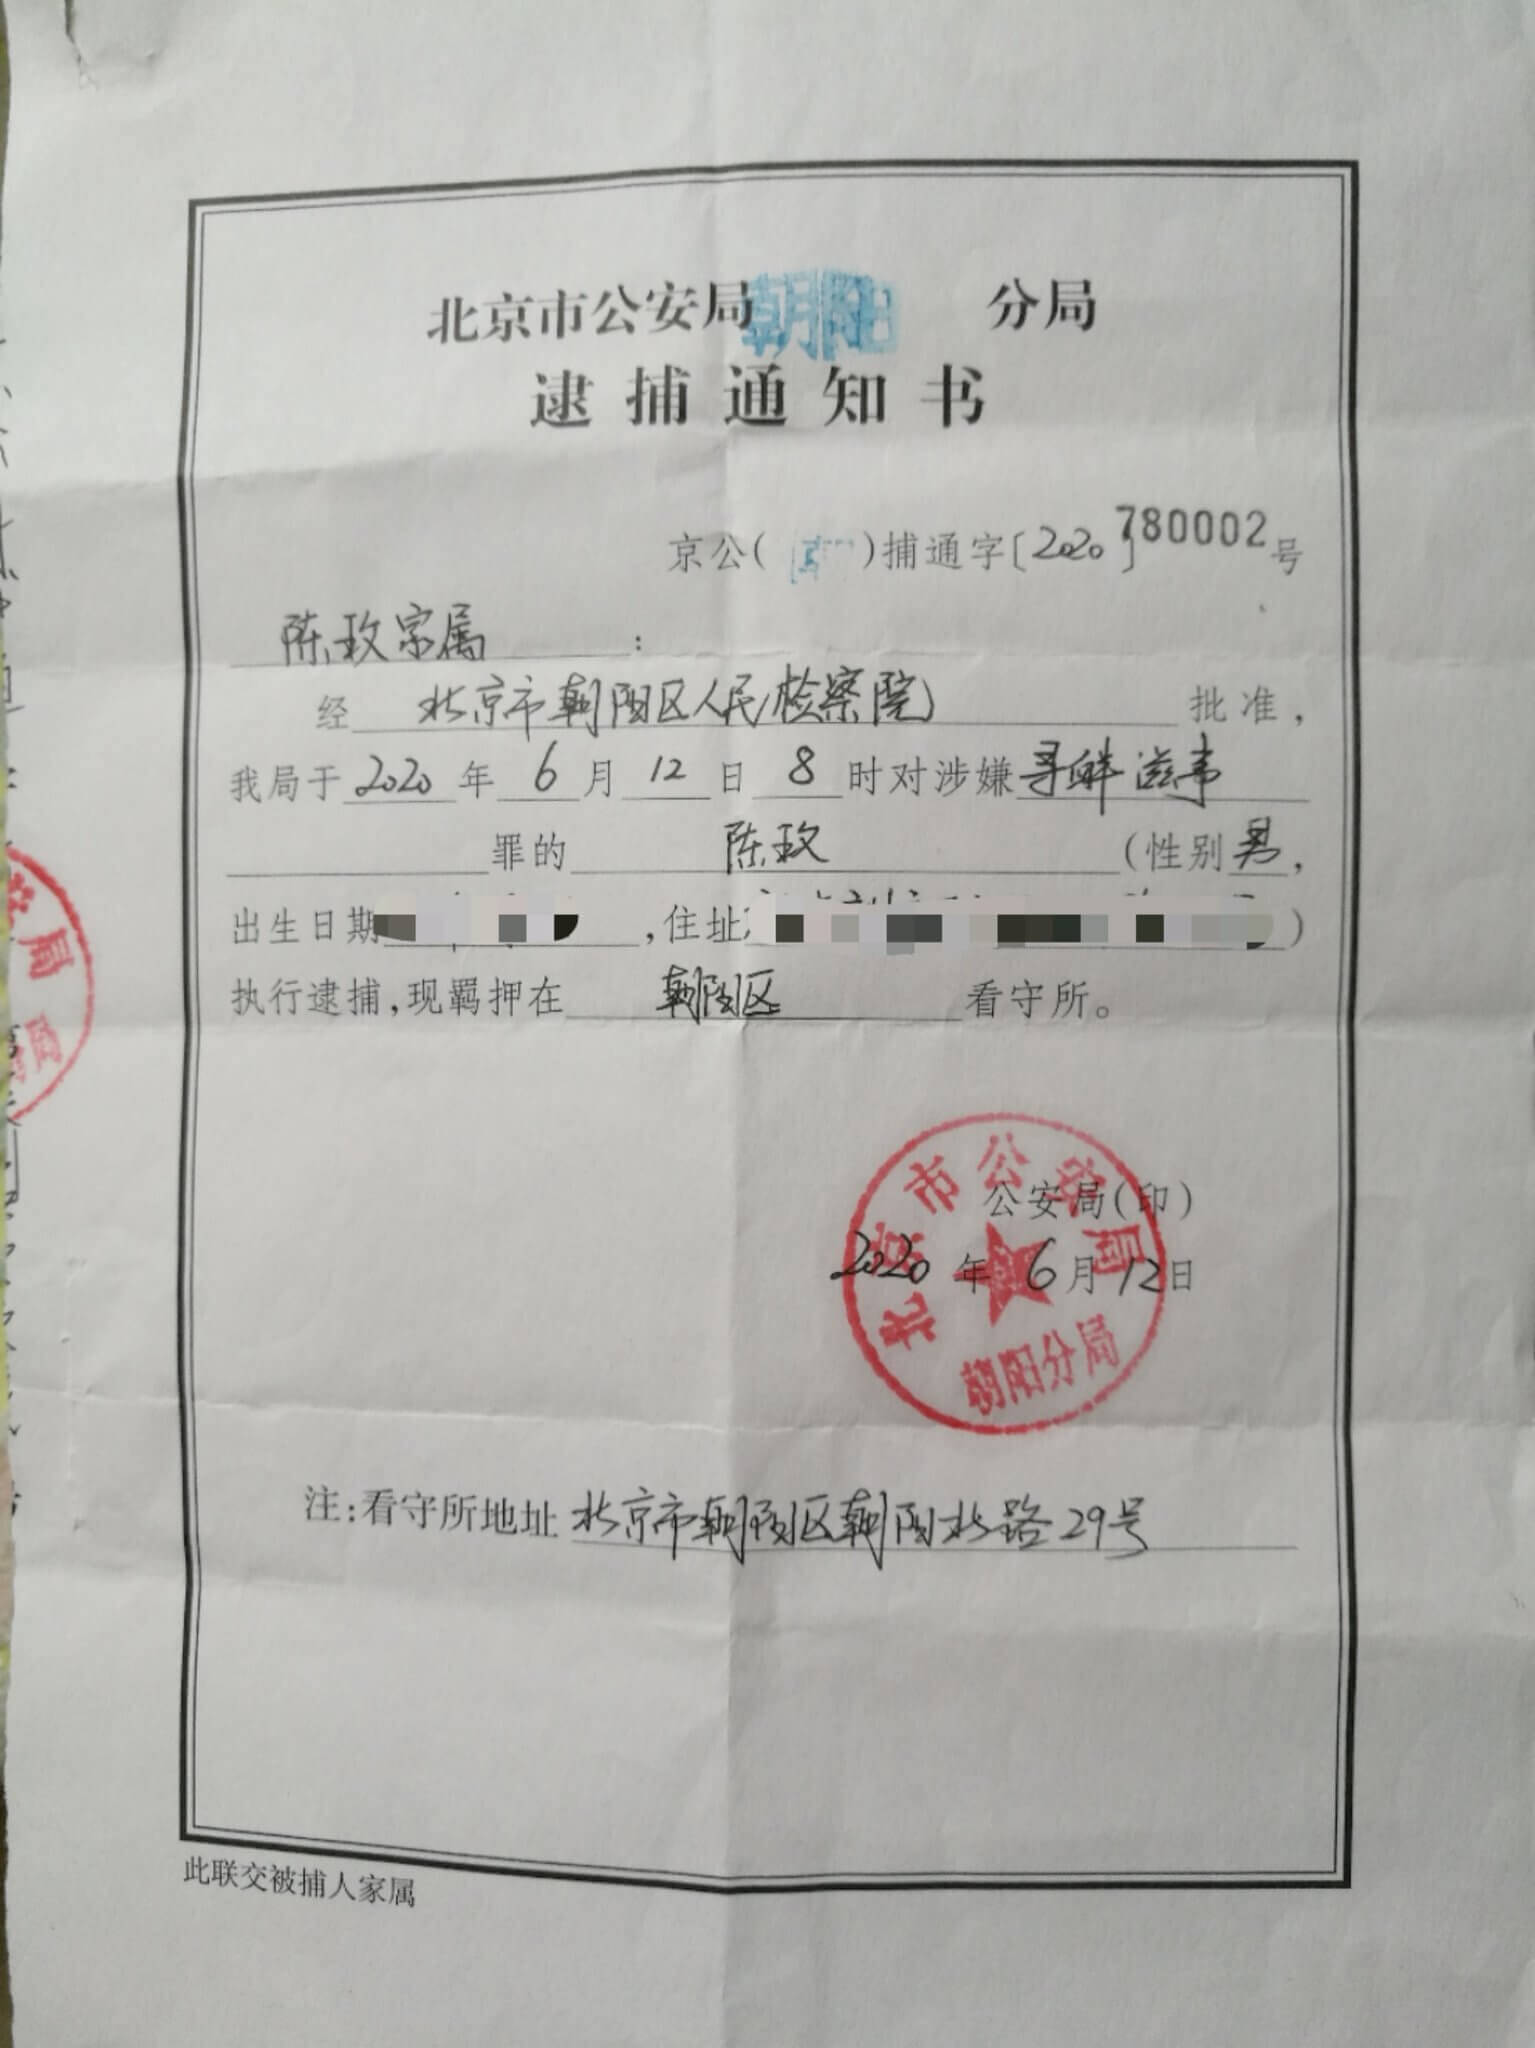 This is the arrest warrant for Chen Mei issued by Beijing Public Security Bureau on June 12, 2020.